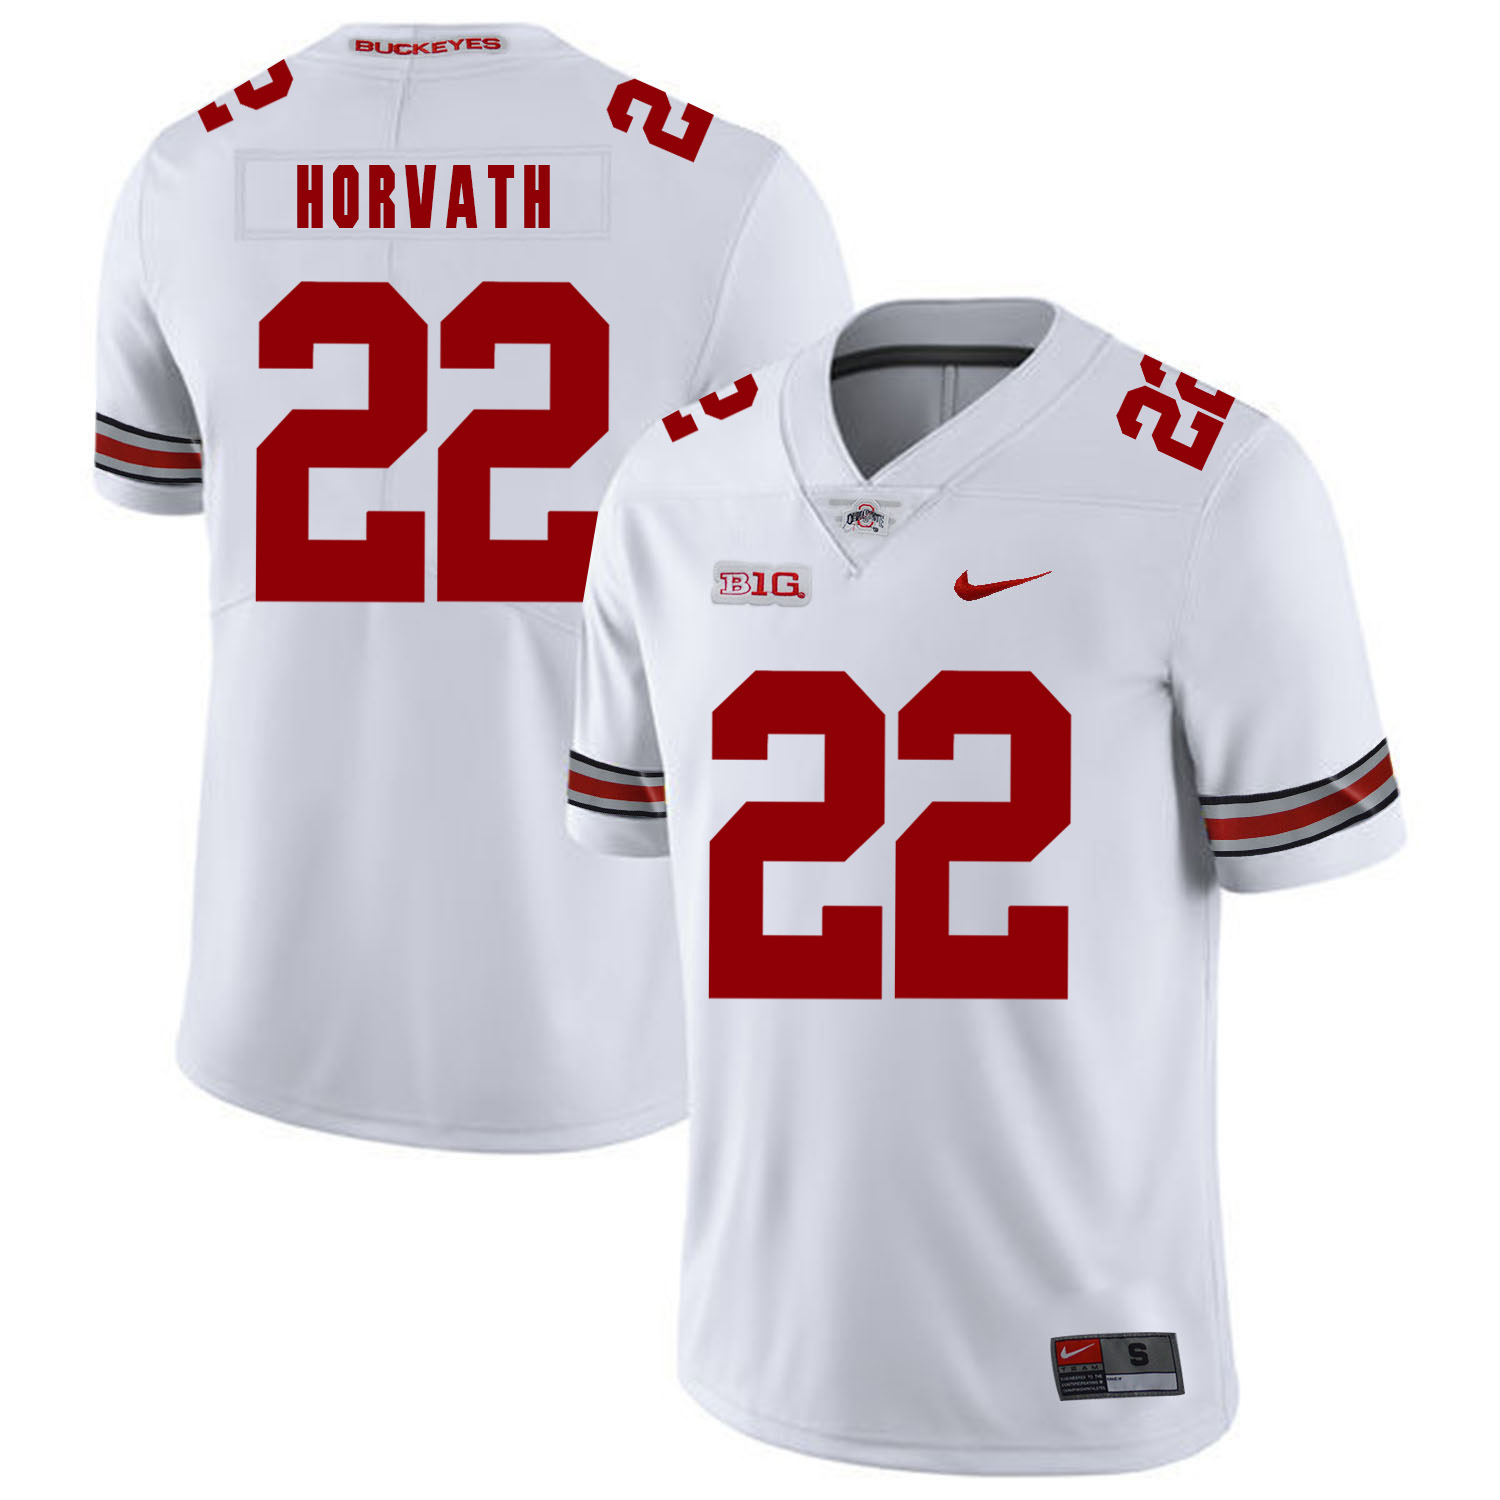 Ohio State Buckeyes 22 Les Horvath White Nike College Football Jersey